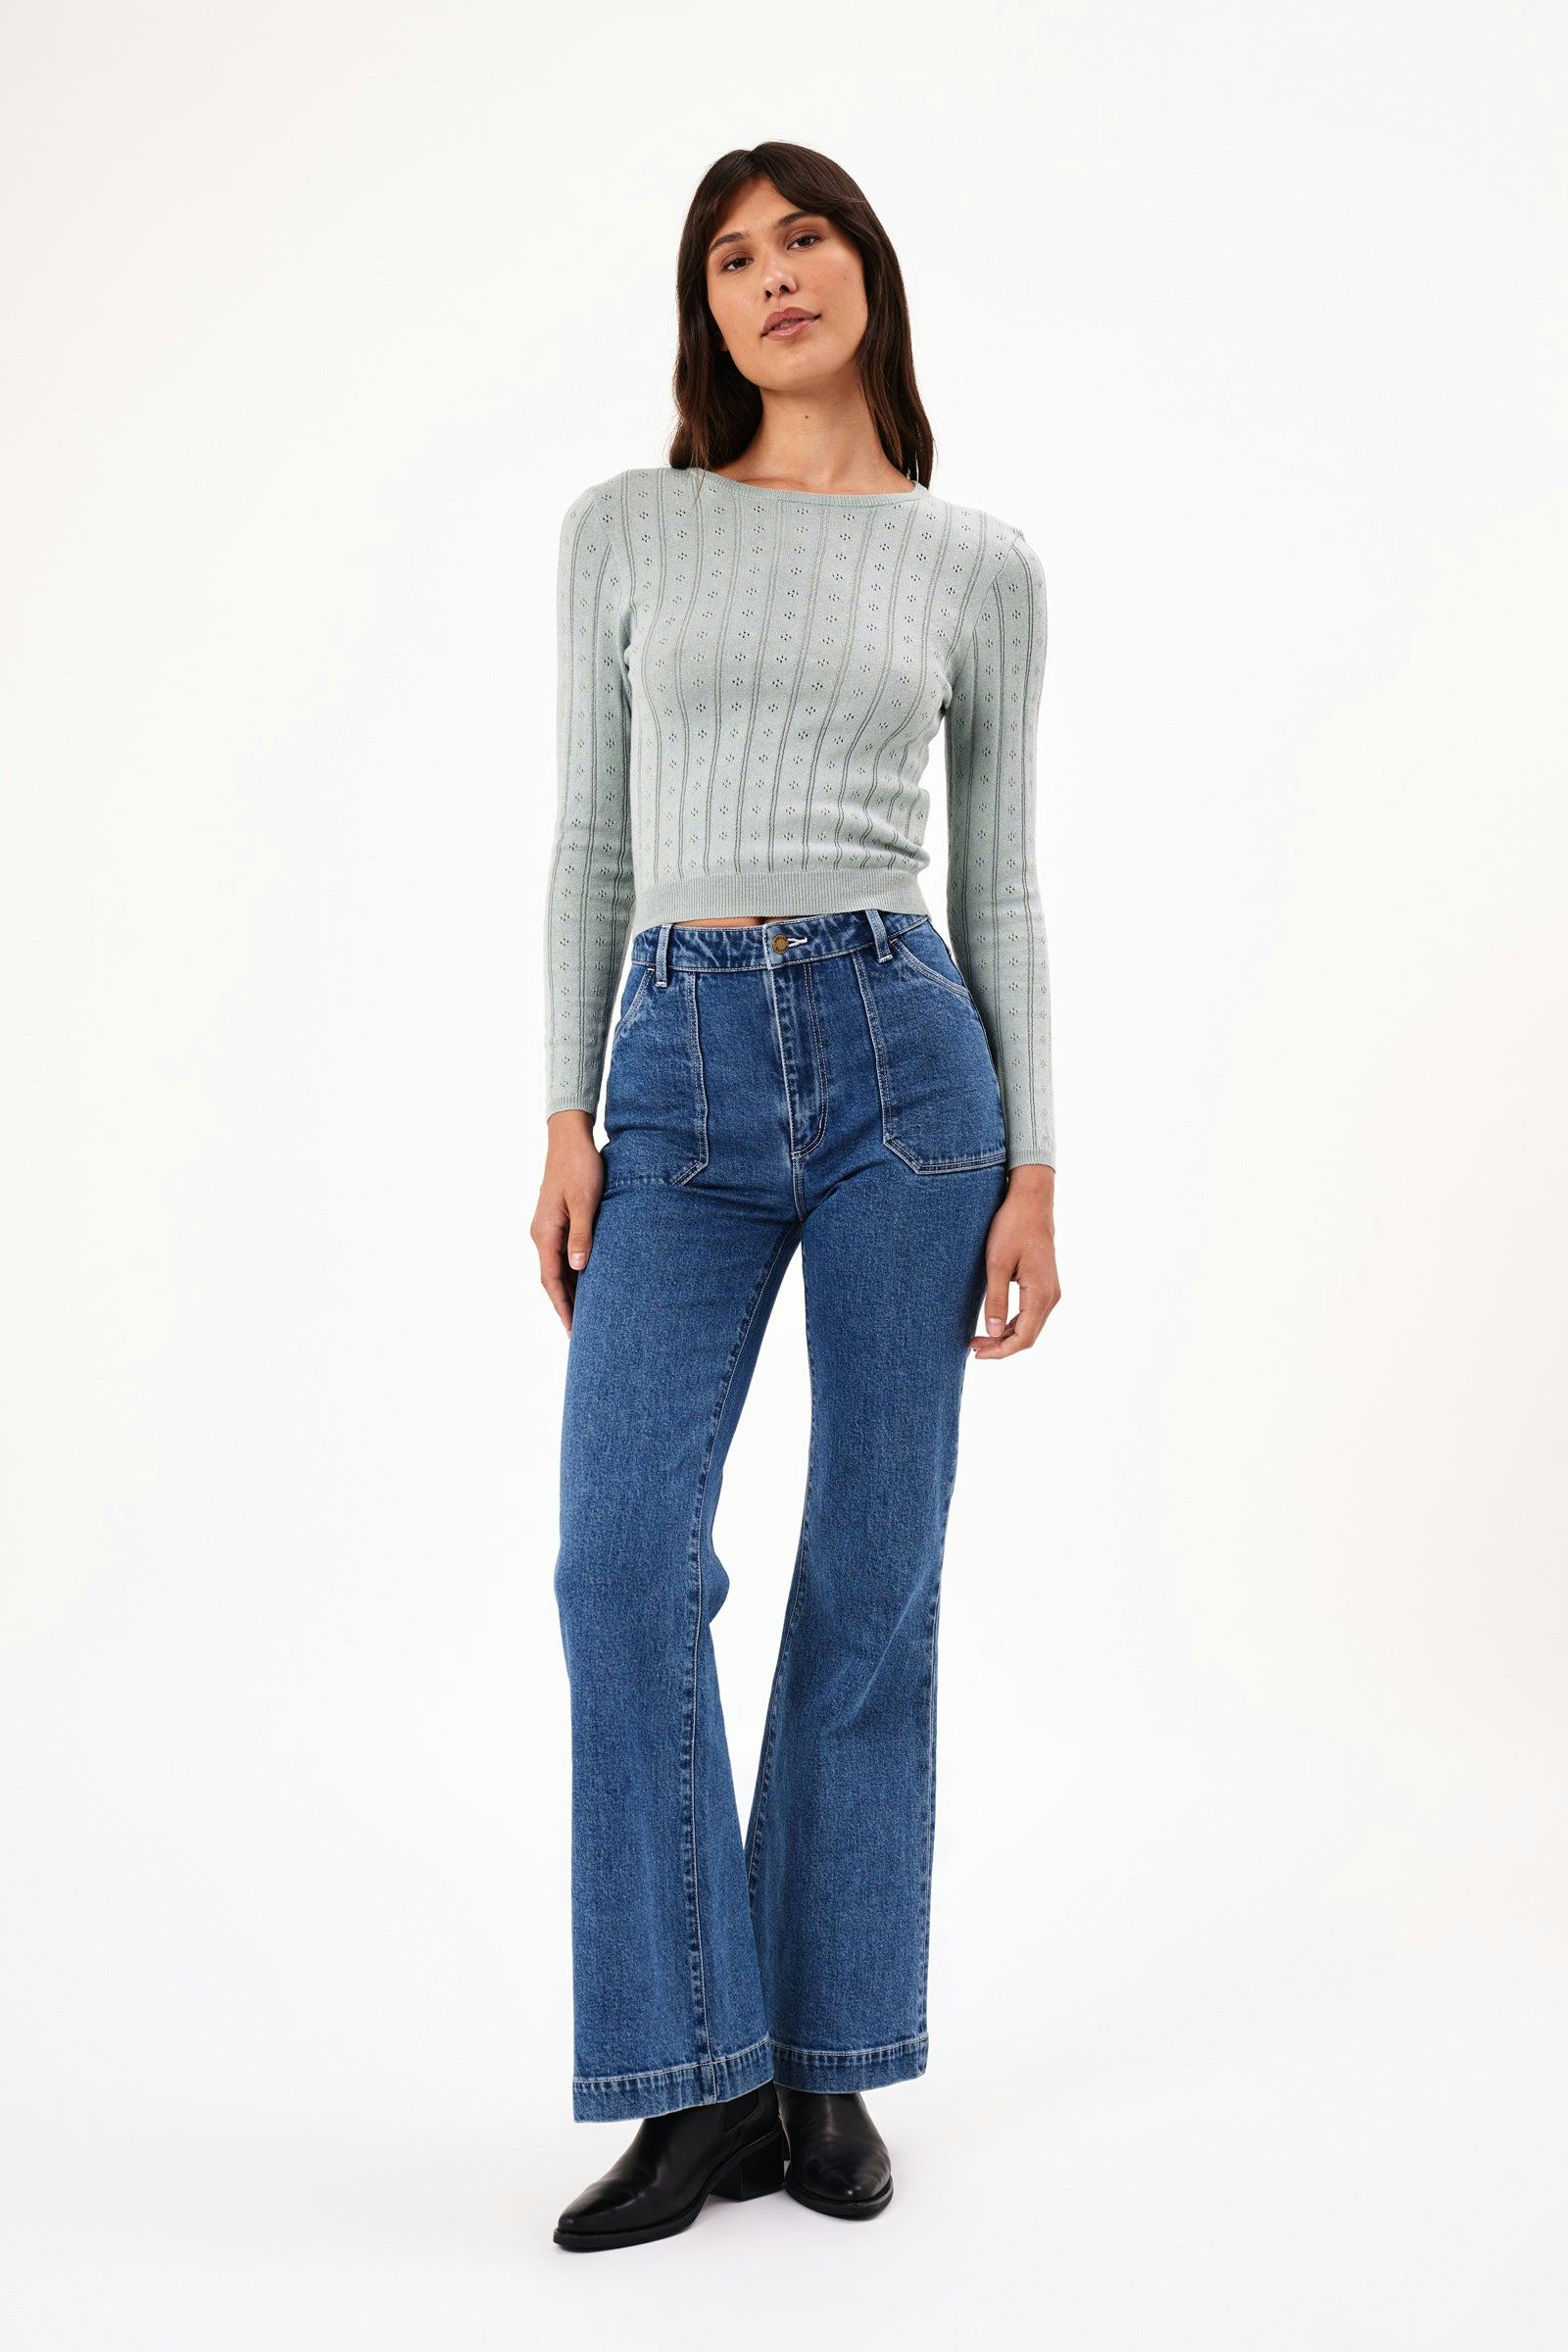 Higher High-Waisted Flare Corduroy Pants for Women, Old Navy